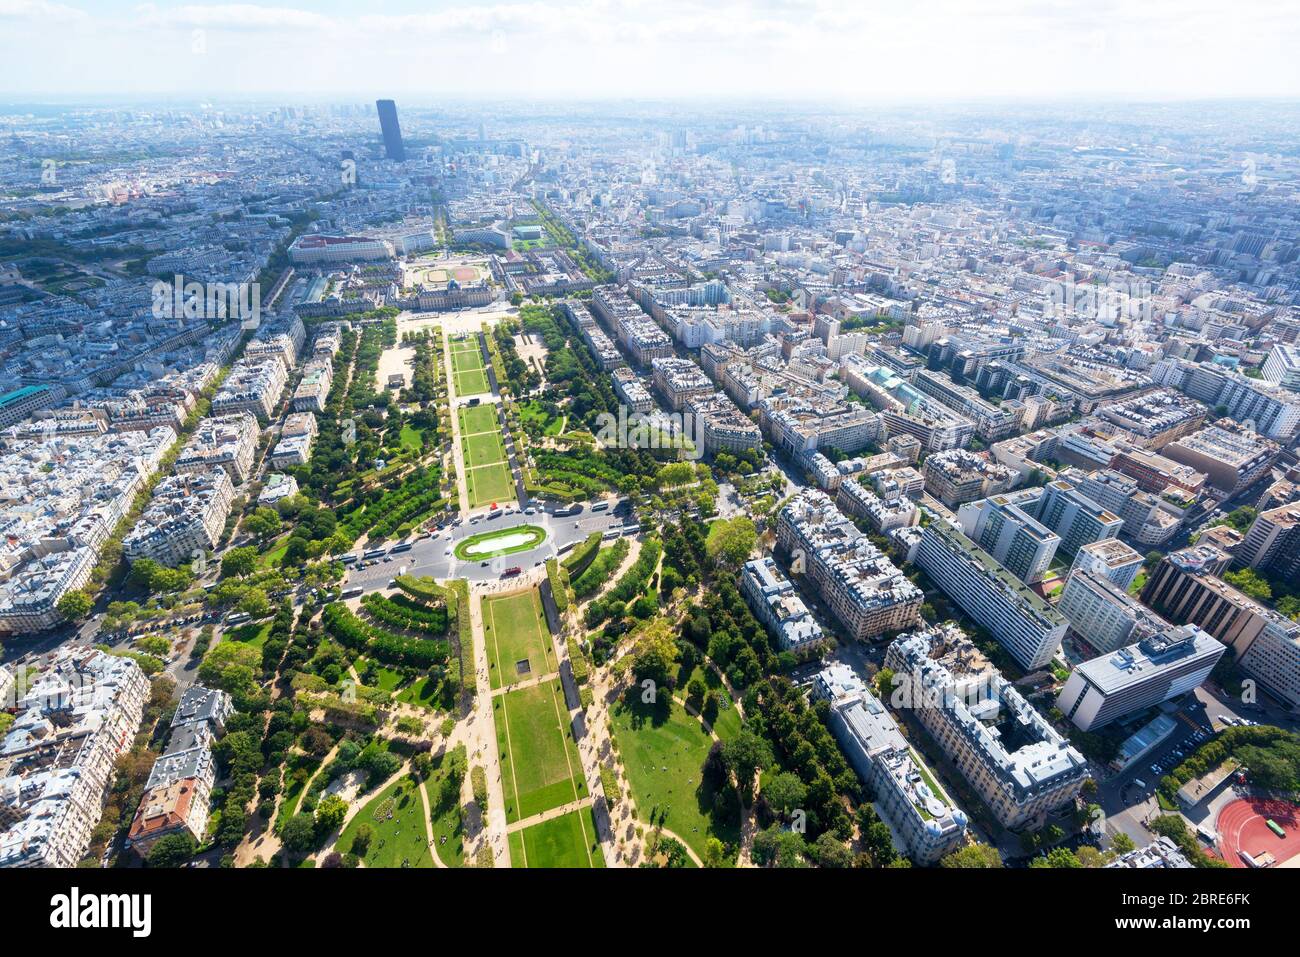 View of Paris from the Eiffel Tower, France Stock Photo